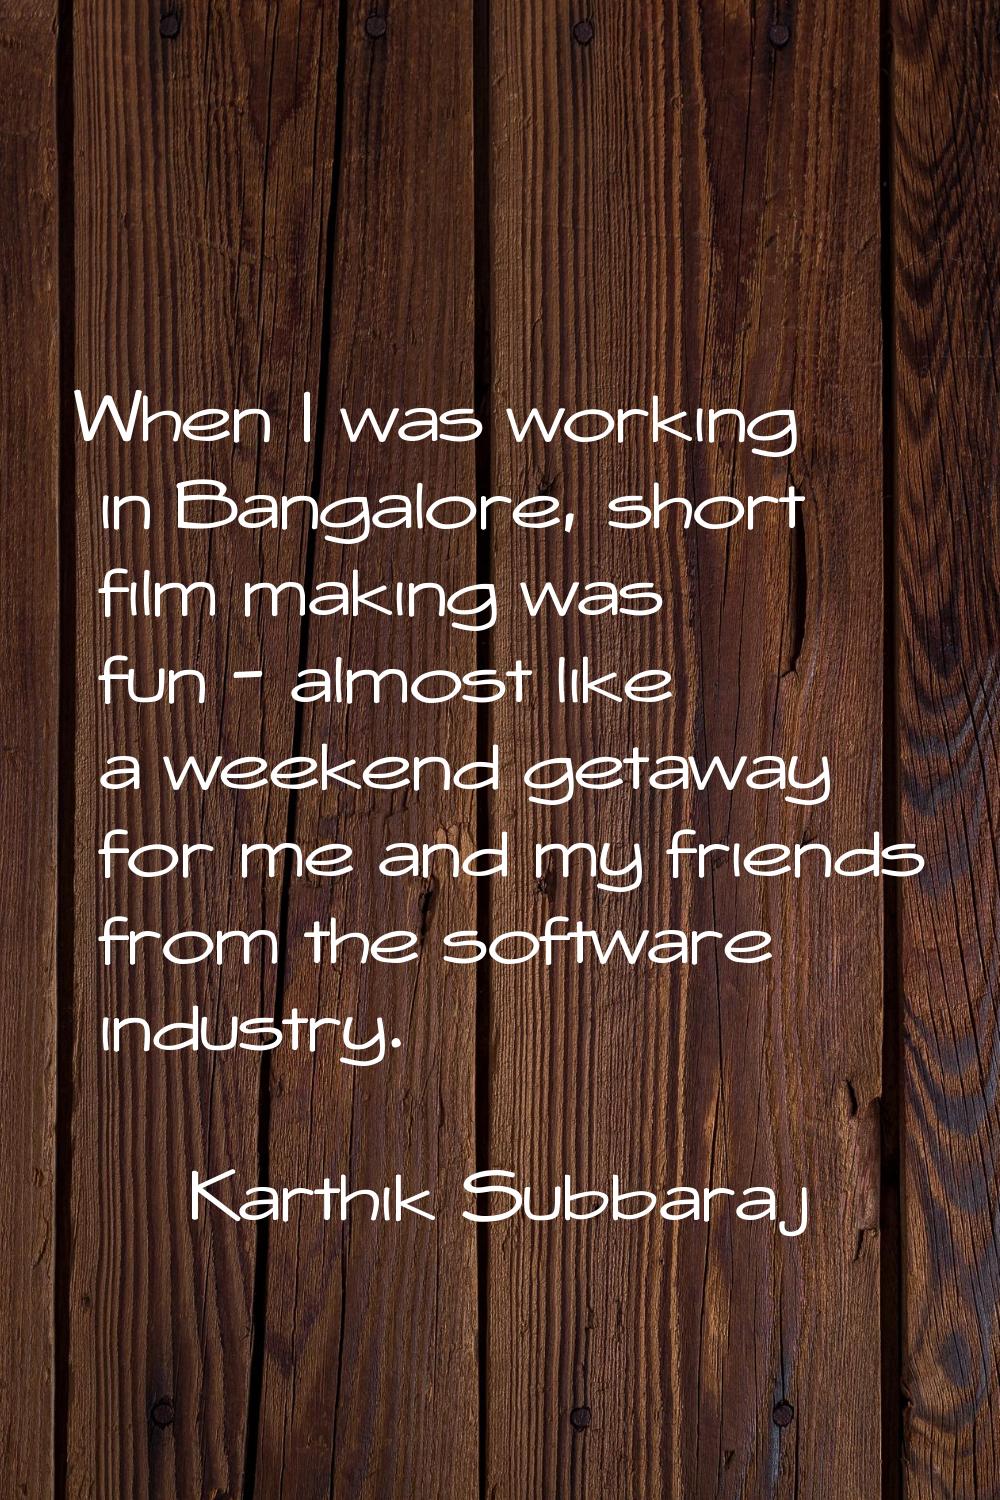 When I was working in Bangalore, short film making was fun - almost like a weekend getaway for me a